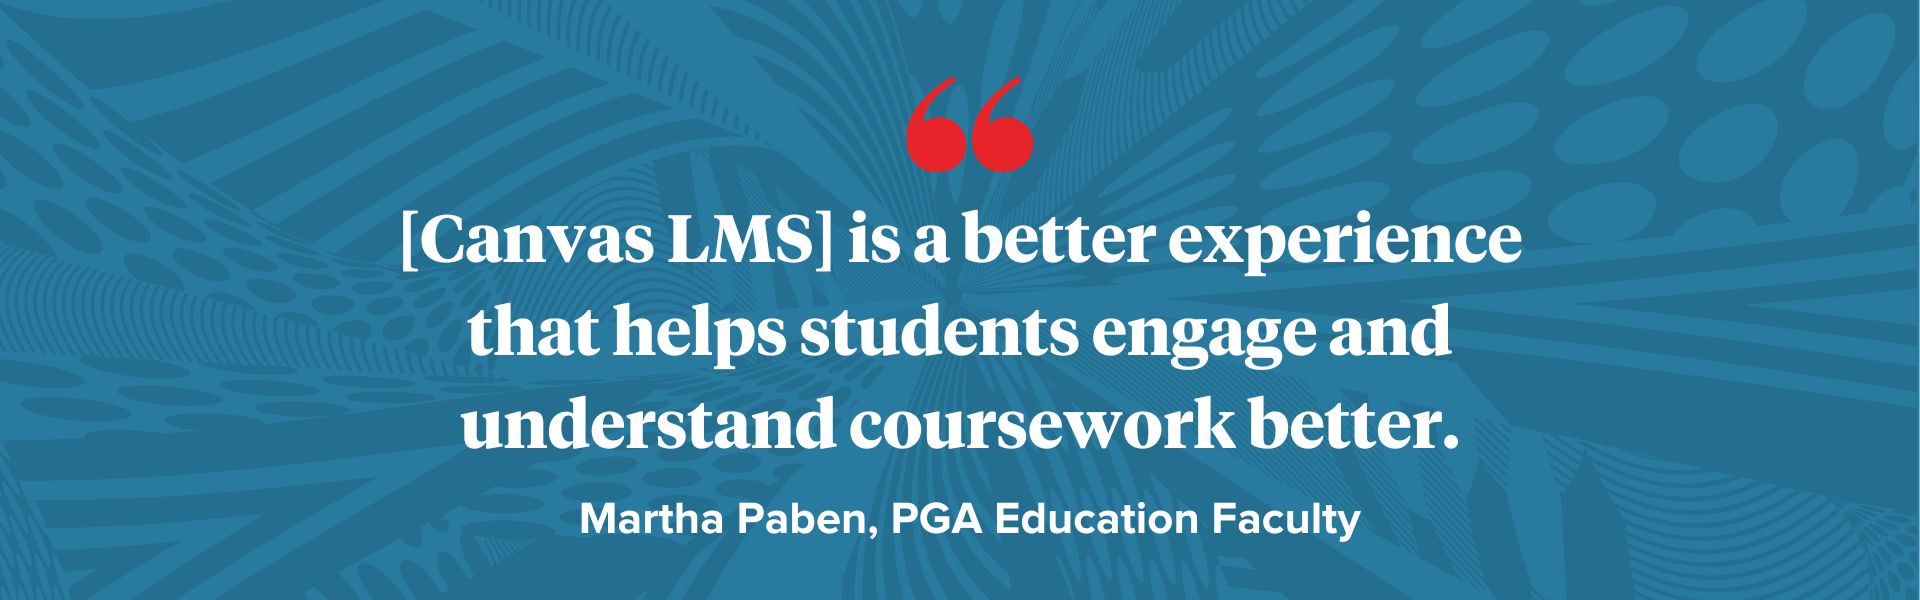 [Canvas LMS] is a better experience that helps students engage and understand coursework better.